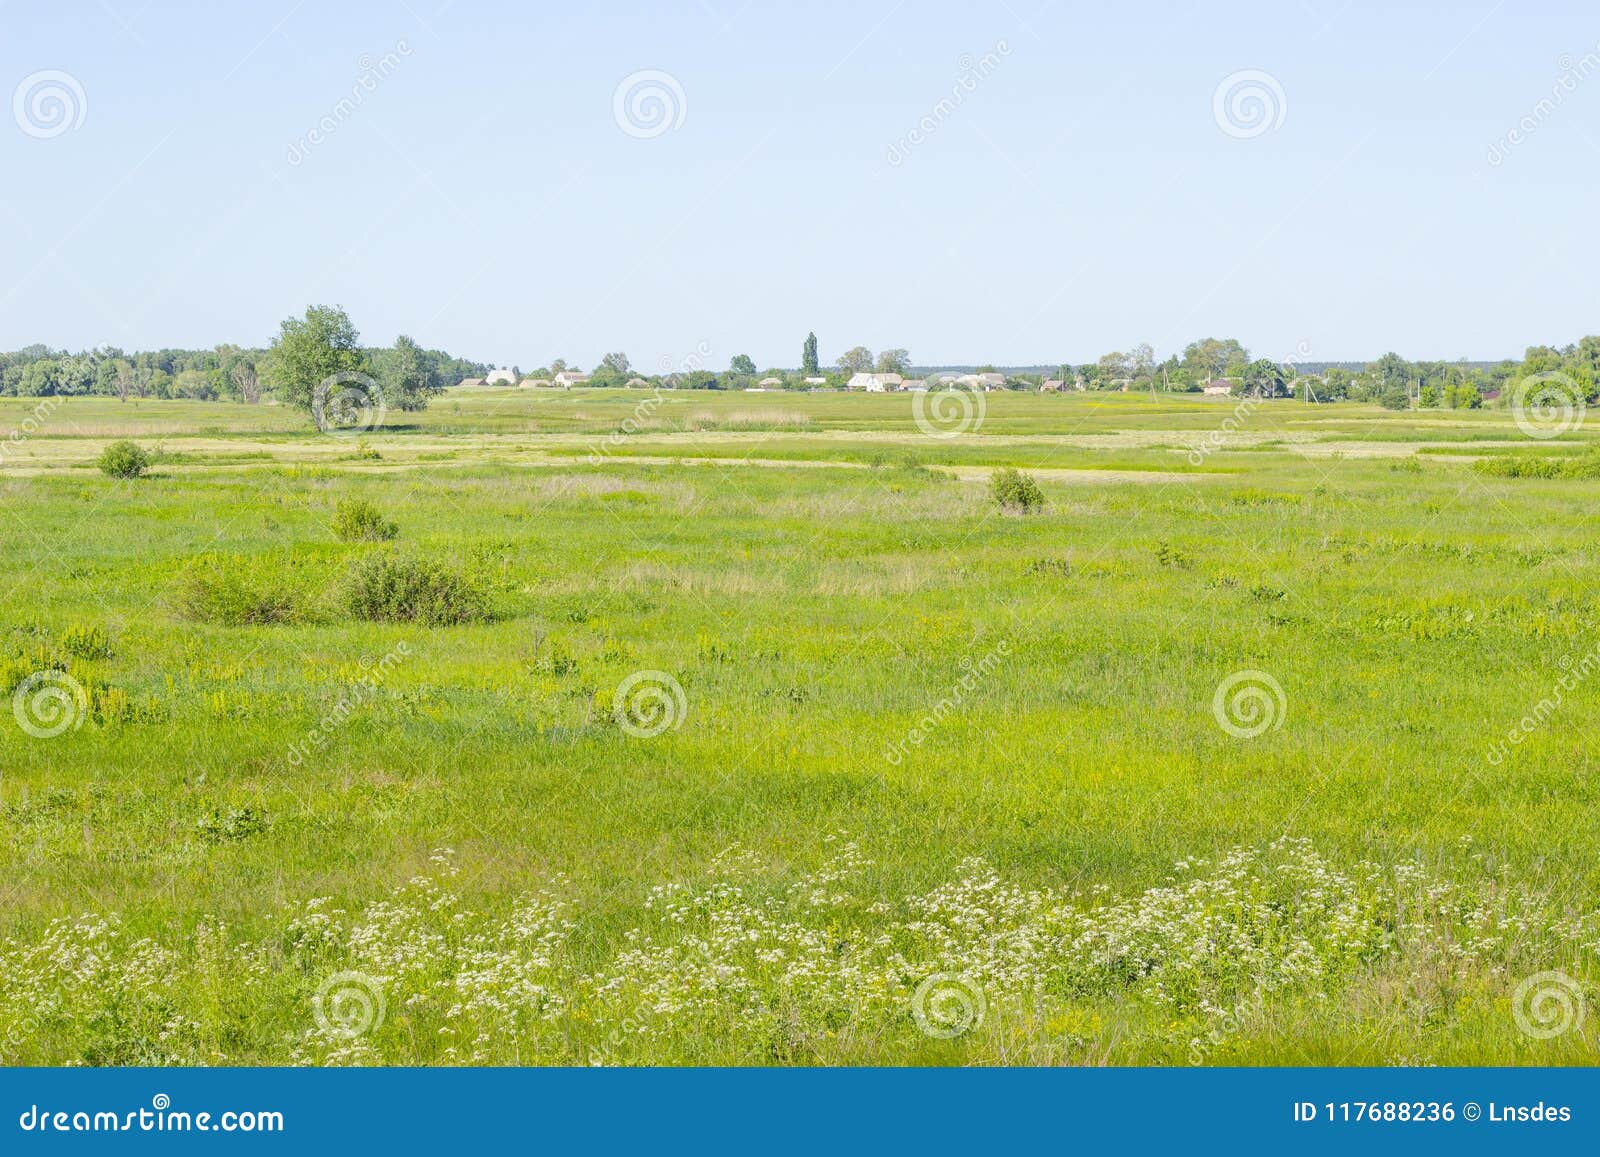 village rural landscape with green field and country houses, summer meadow, grass on a pasture, field, nature background